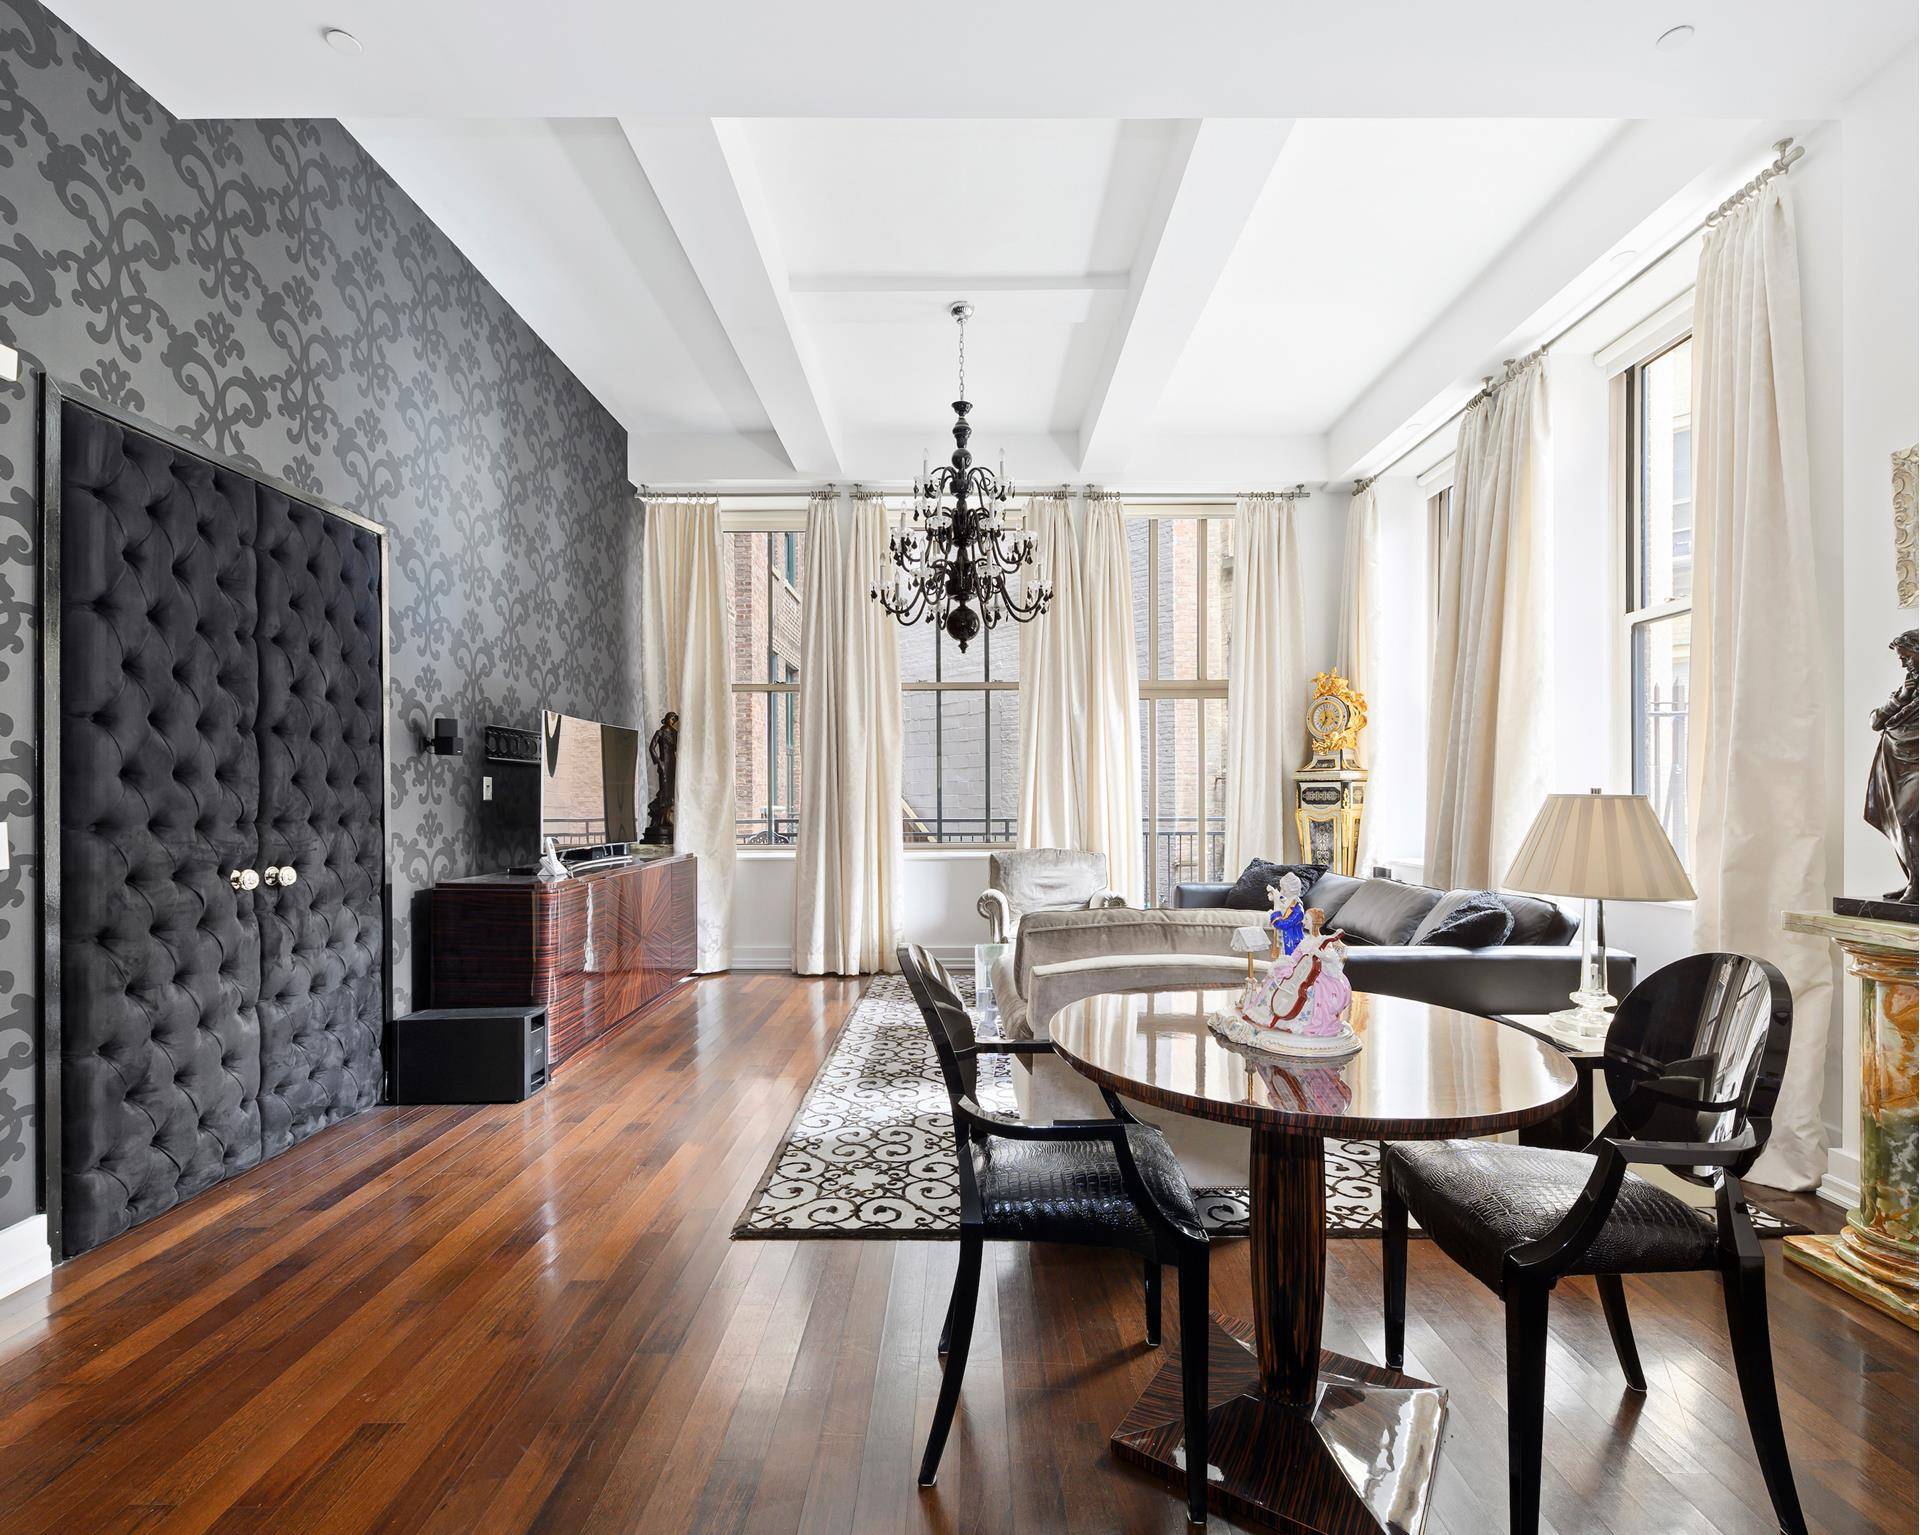 147 Waverly Place is an intimate luxurious boutique prewar condominium located on one of the tree lined West Village streets populated by historic townhouses.